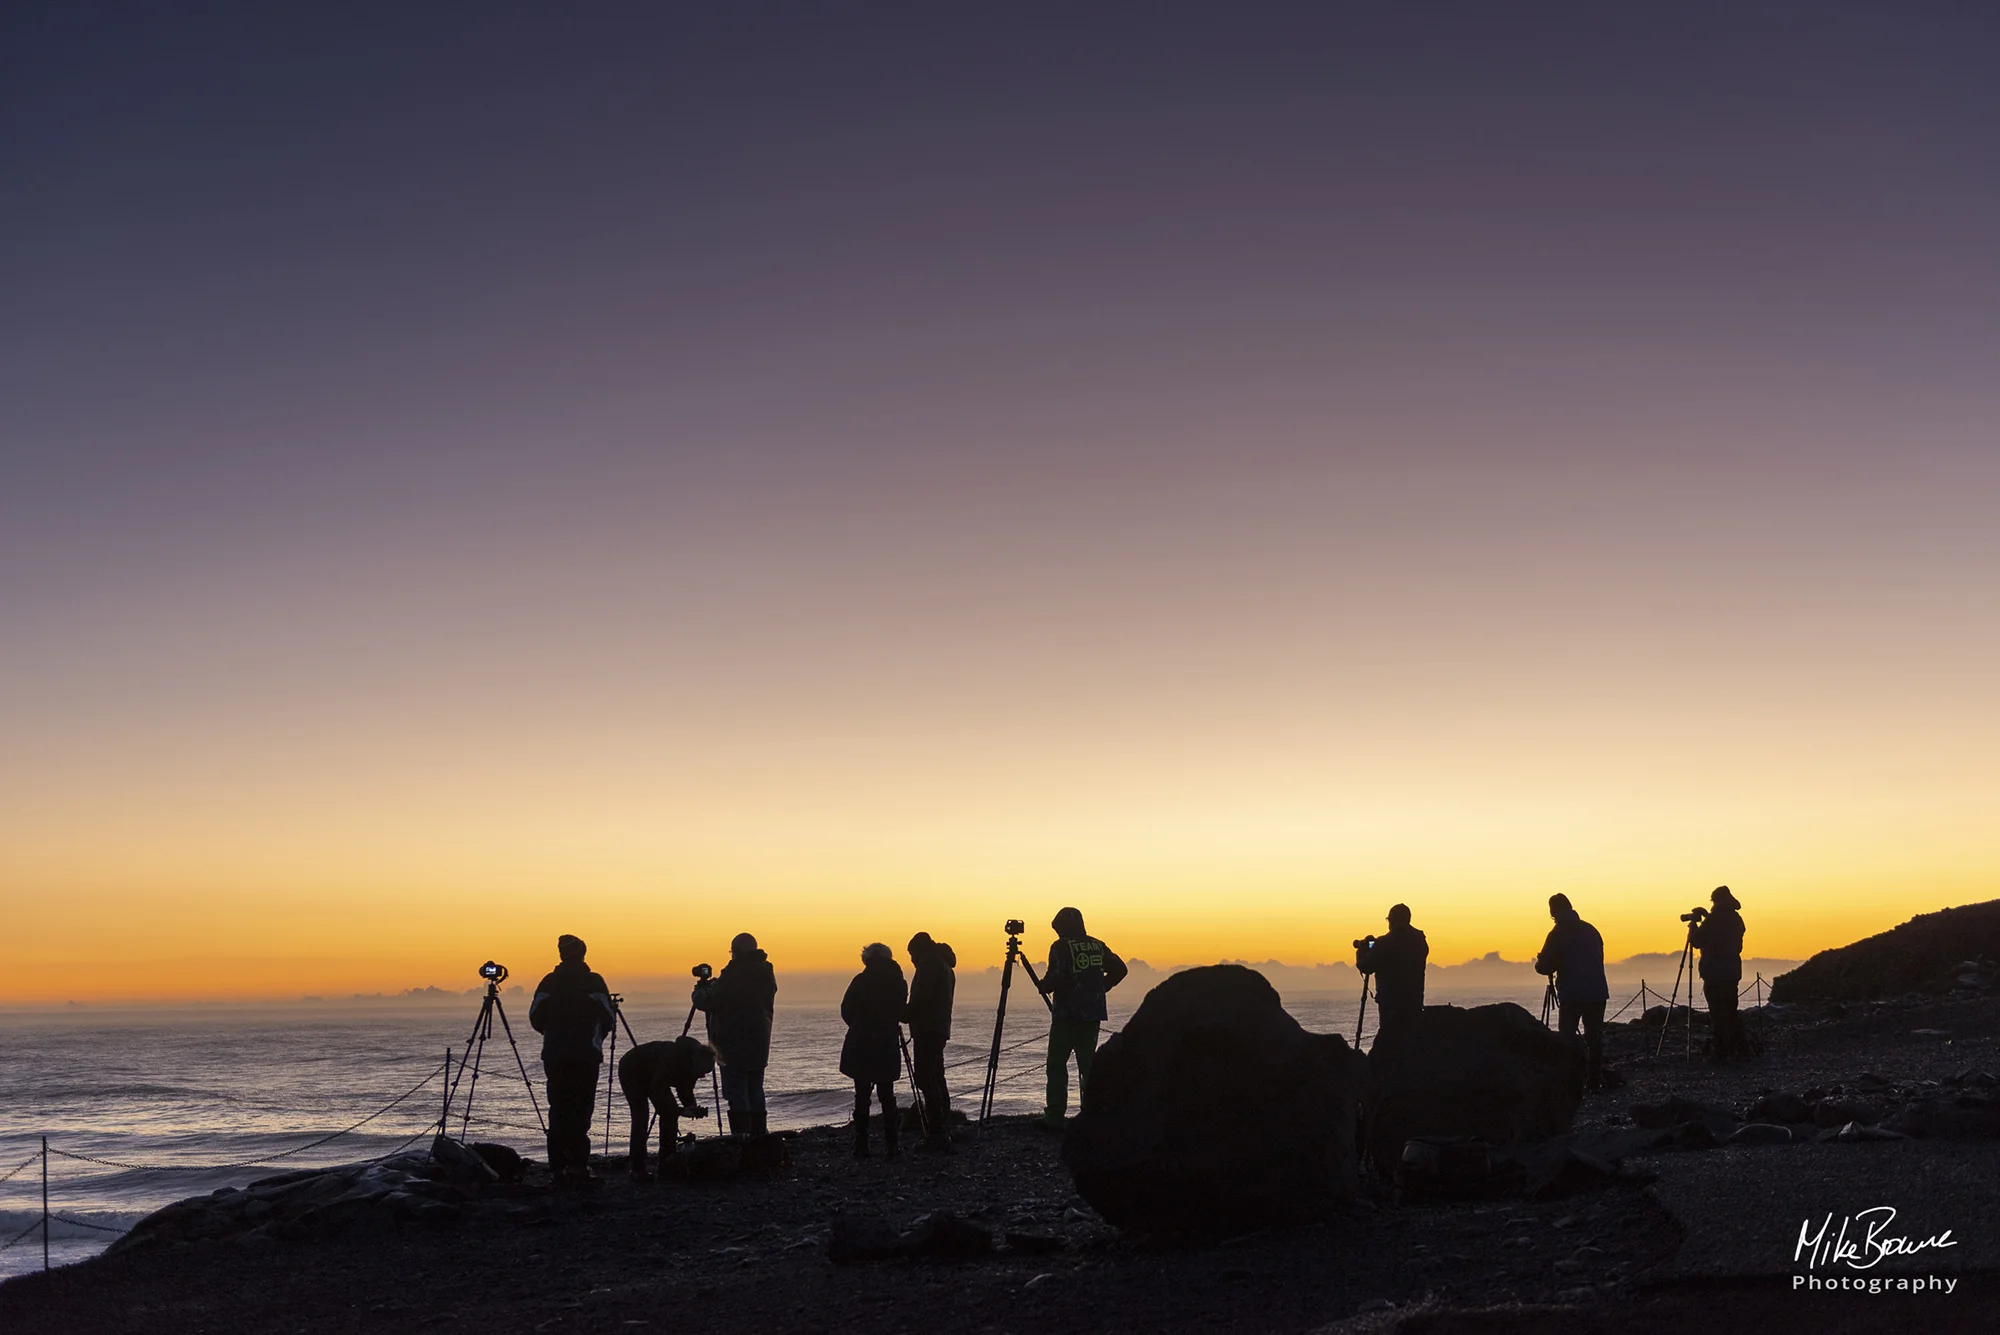 Group of photographers and tripods photographing sunrise over ocean at Reynisdrangar Iceland